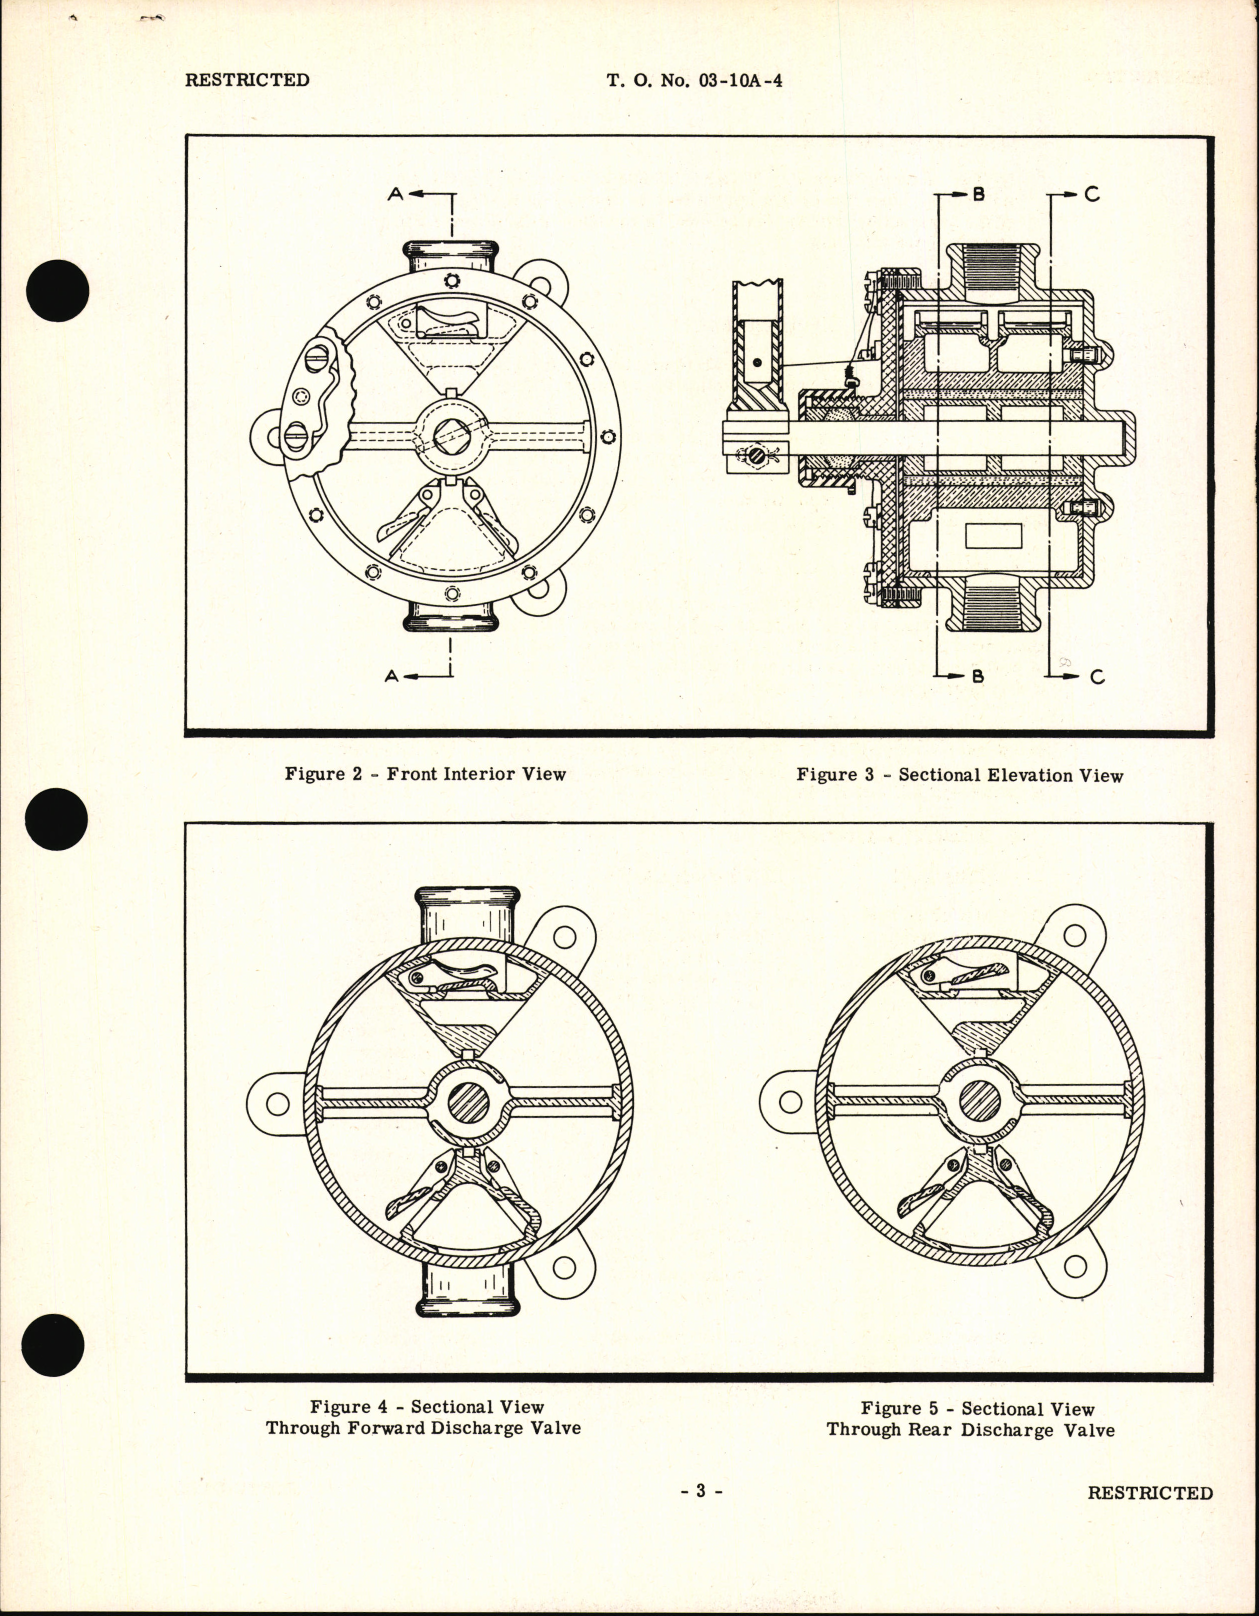 Sample page 7 from AirCorps Library document: Handbook of Instructions with Parts Catalog for Type D-3 Hand Refueling Pump